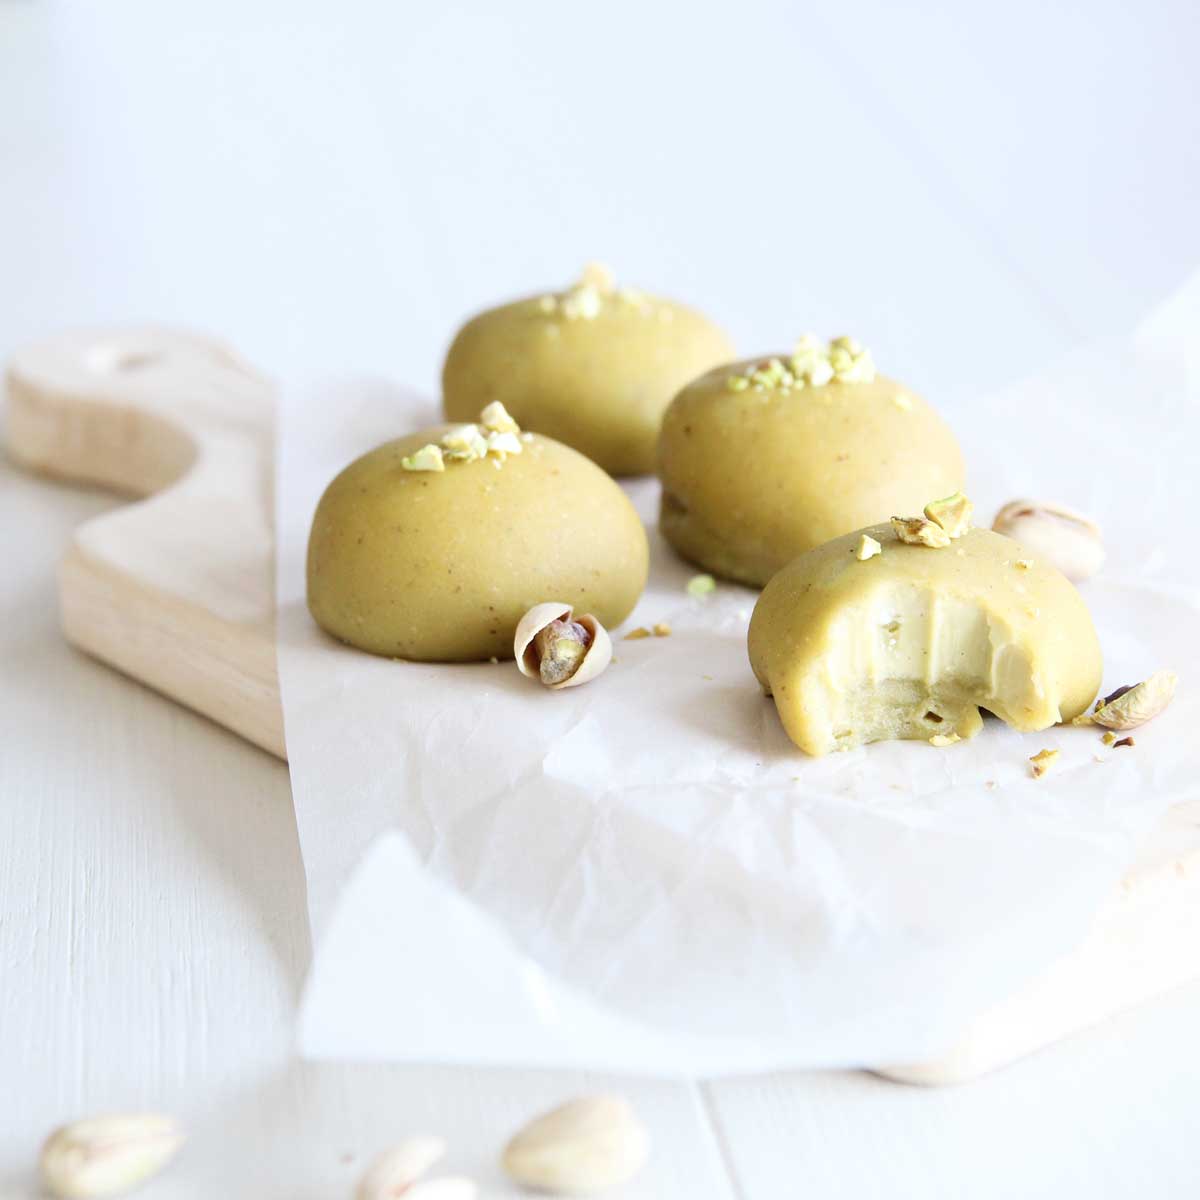 The Best Ever Pistachio Butter Mochi (Made with Mochiko Flour) - Lemon Whipped Cream